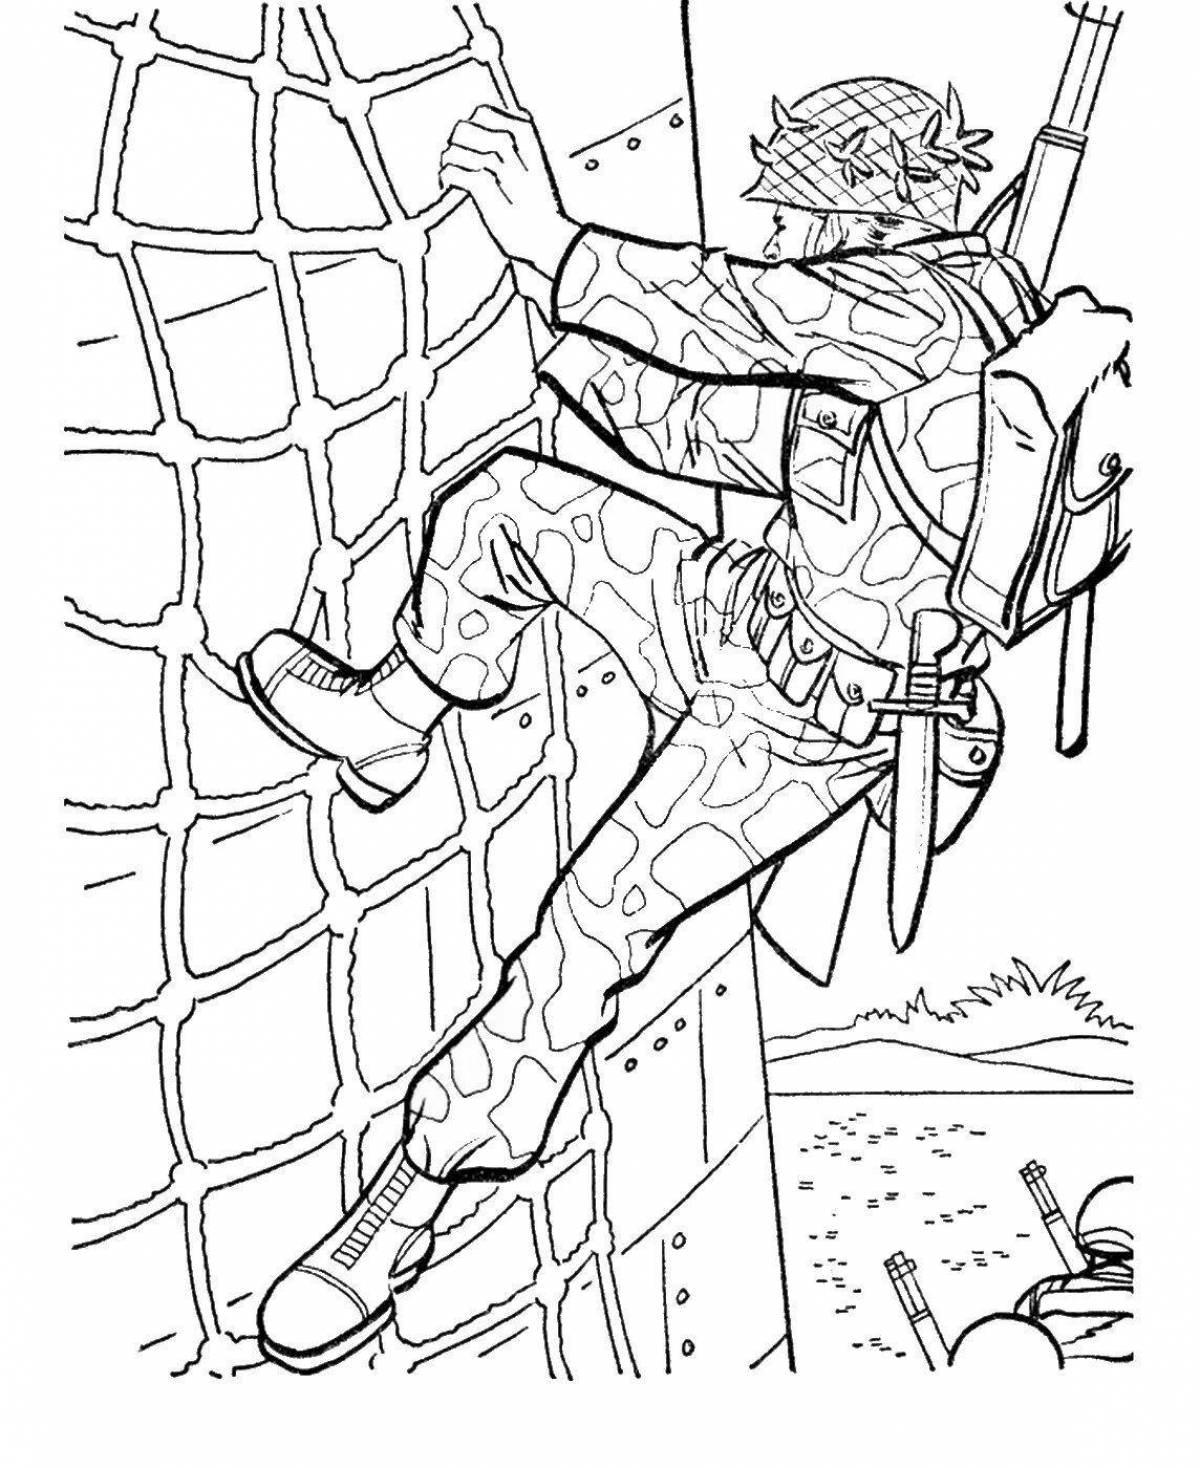 Glorious soldiers coloring pages for boys